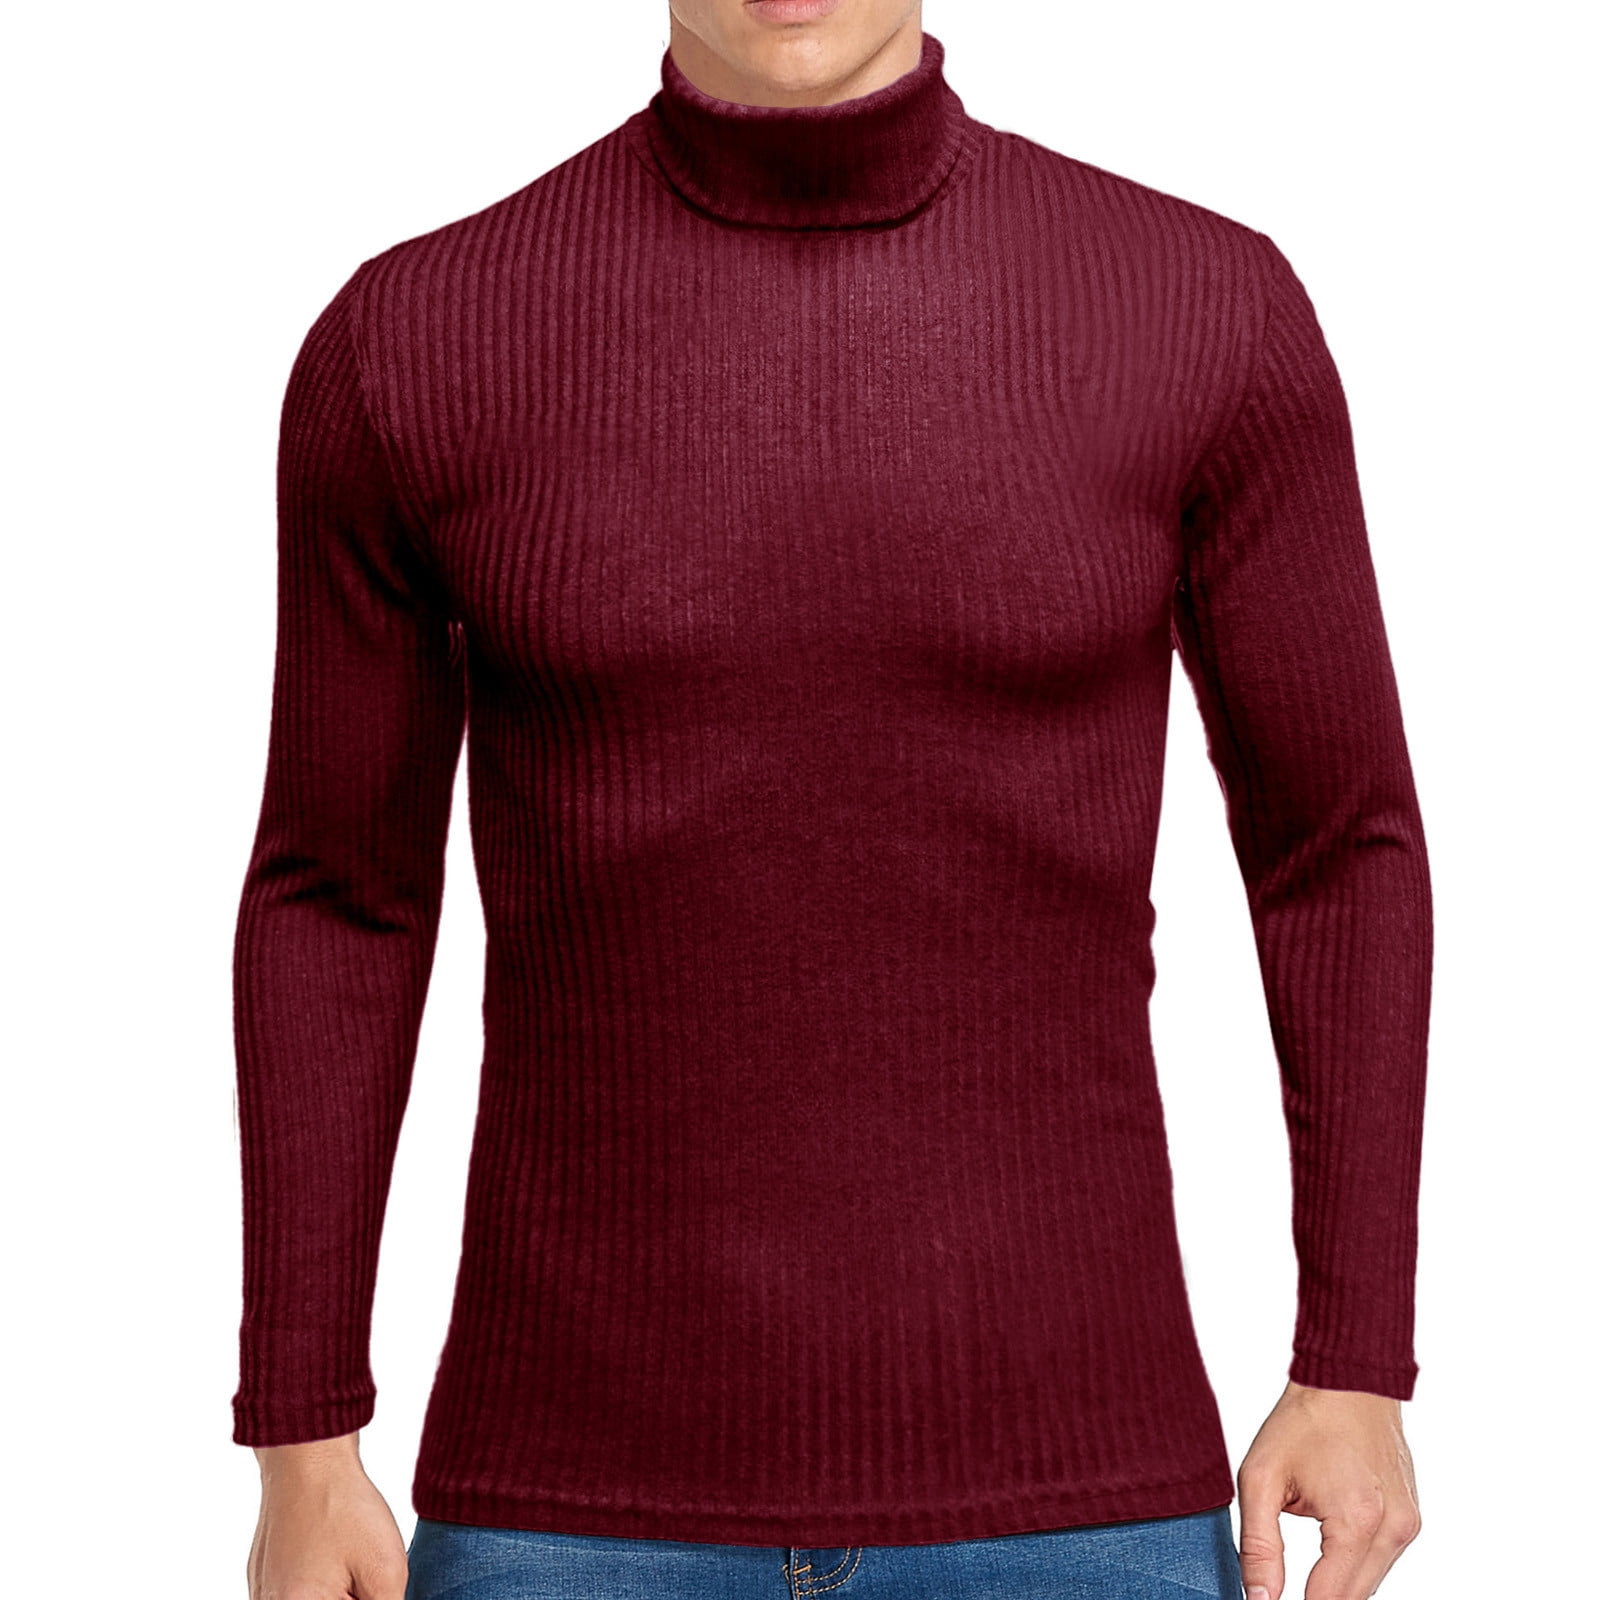 WREESH Men Solid Ribbed Slim Fit Knitted Pullover Turtleneck Sweater ...